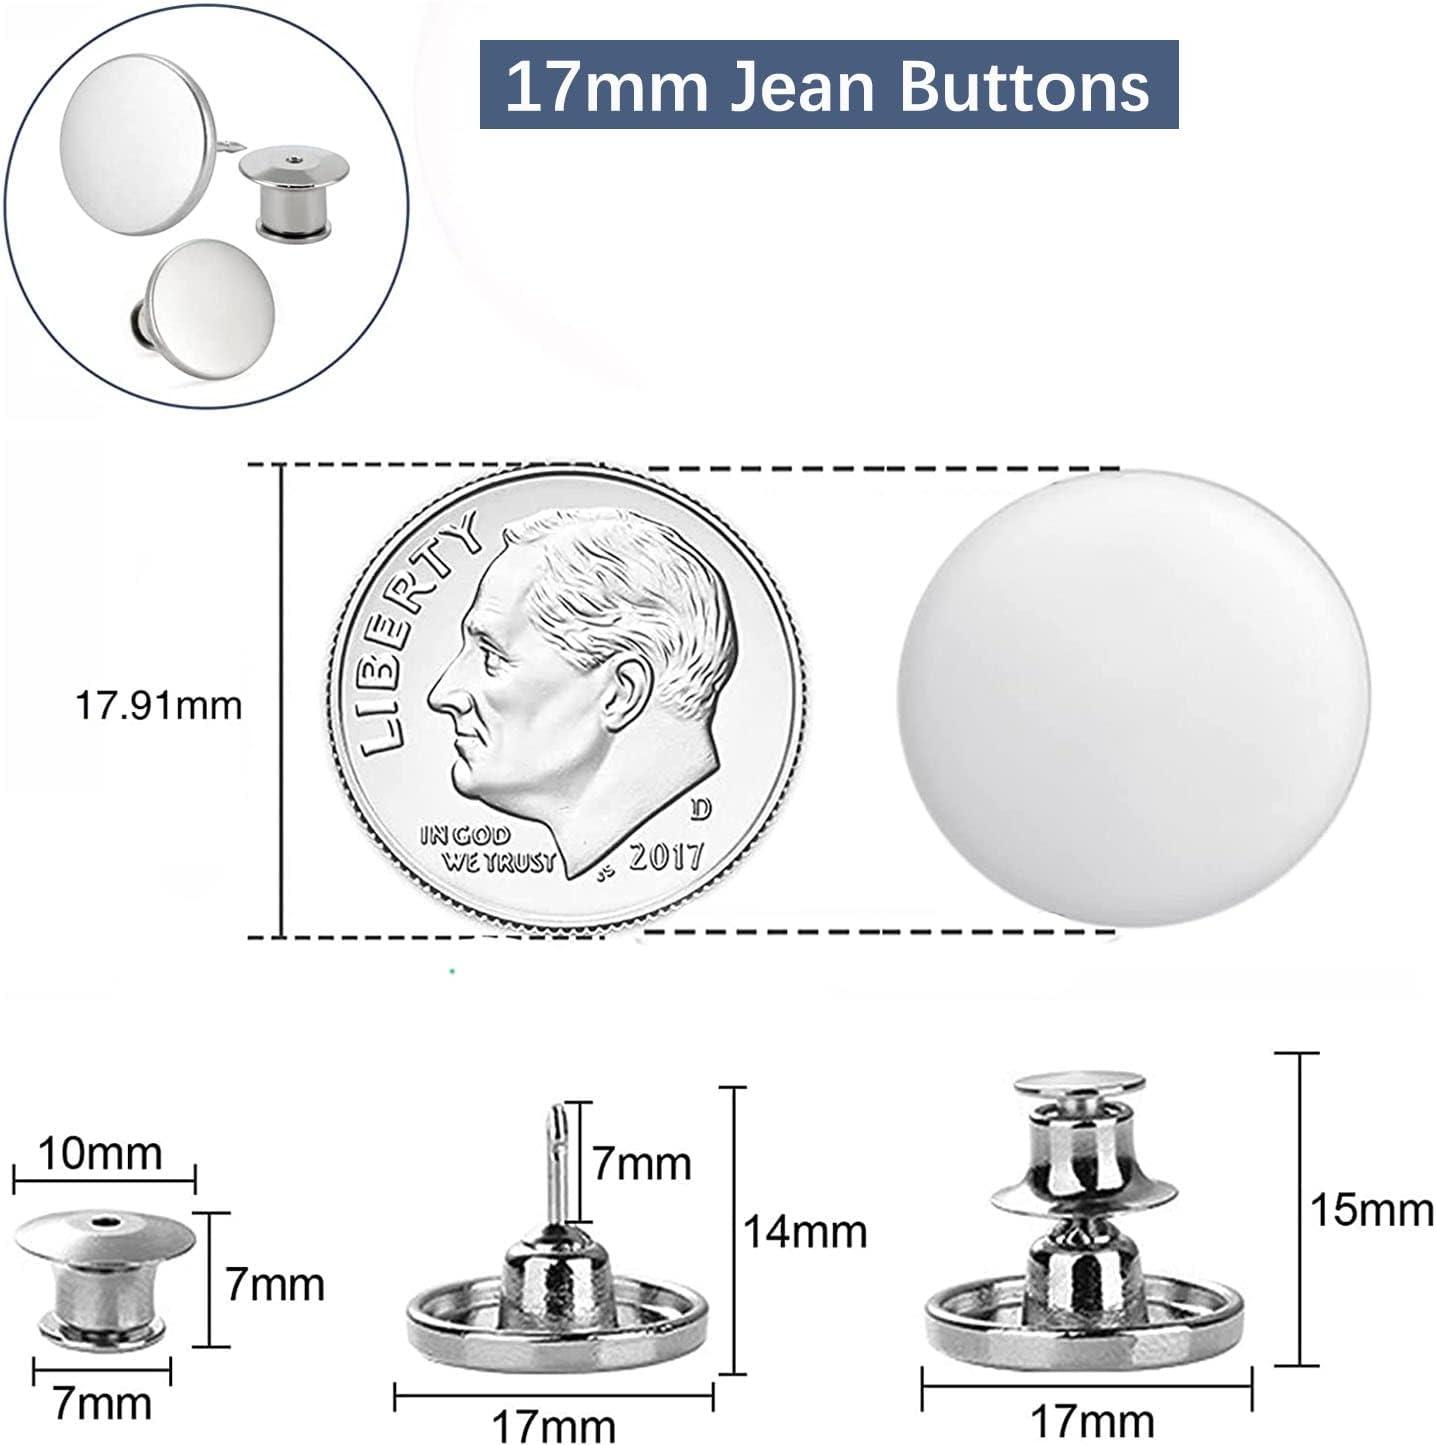 [Upgraded] 12 Sets Jean Buttons pins No Sew Instant 17mm Replacement Button  Adjustable Pants Buttons Kit